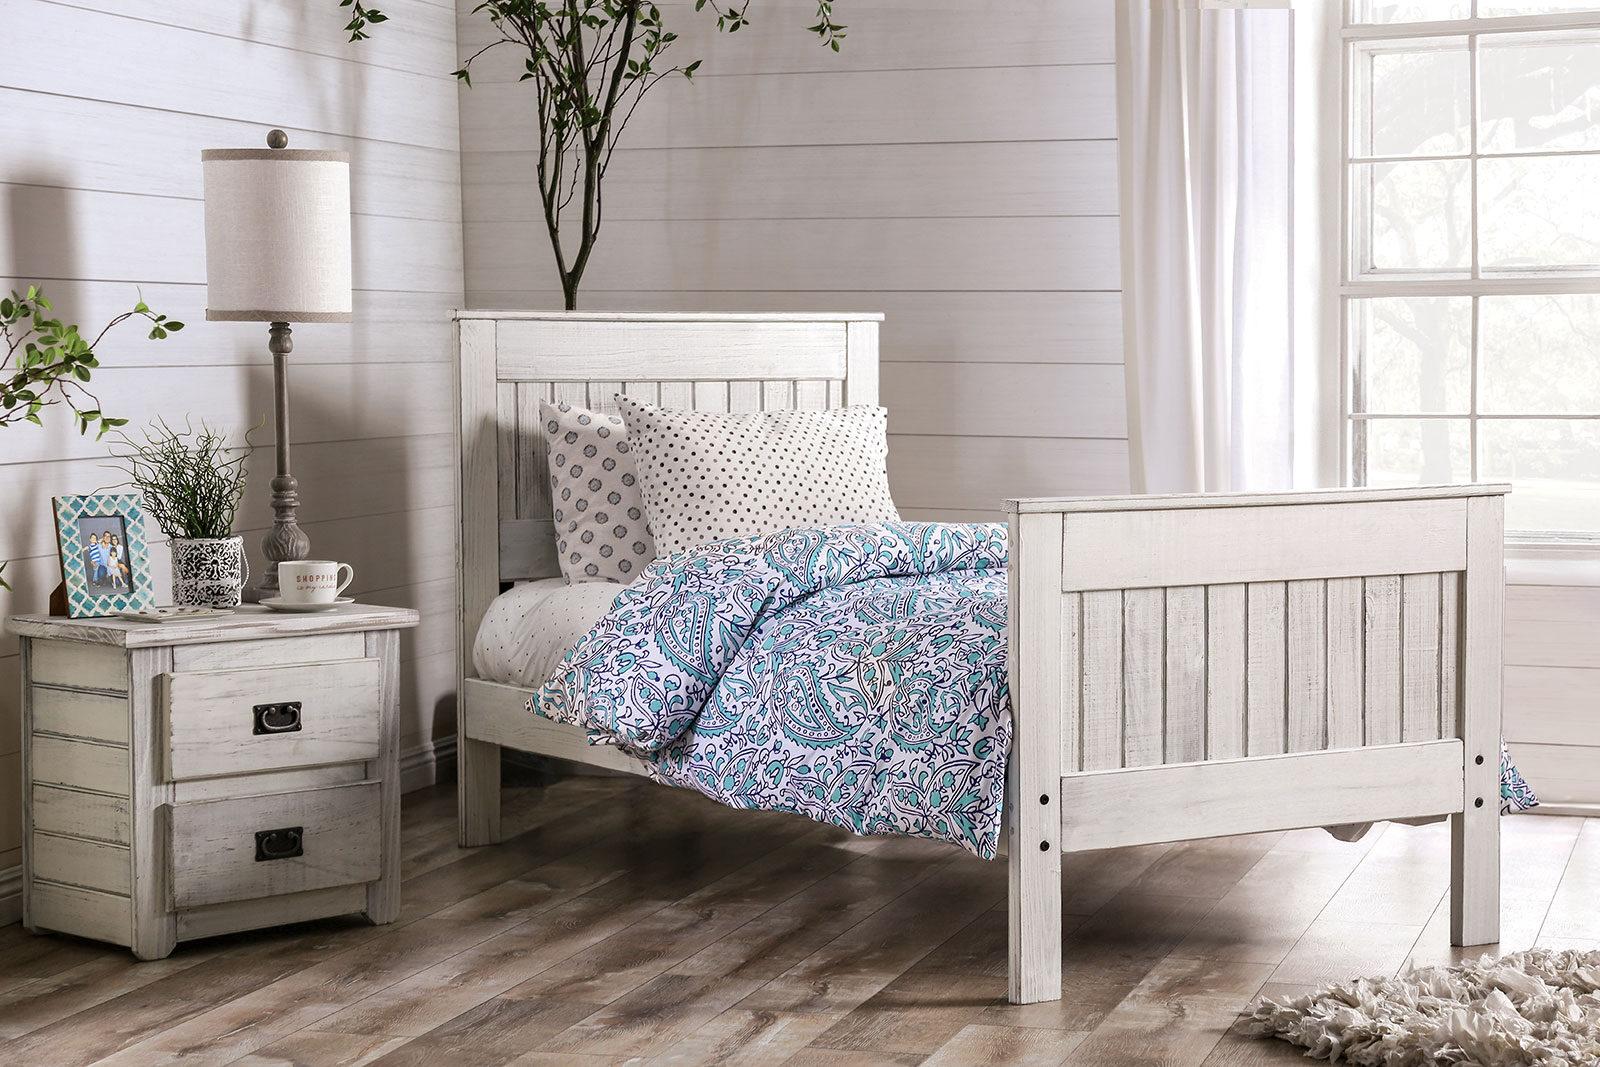 Rustic Panel Bed AM7973WH-Q Rockwall AM7973WH-Q in White 